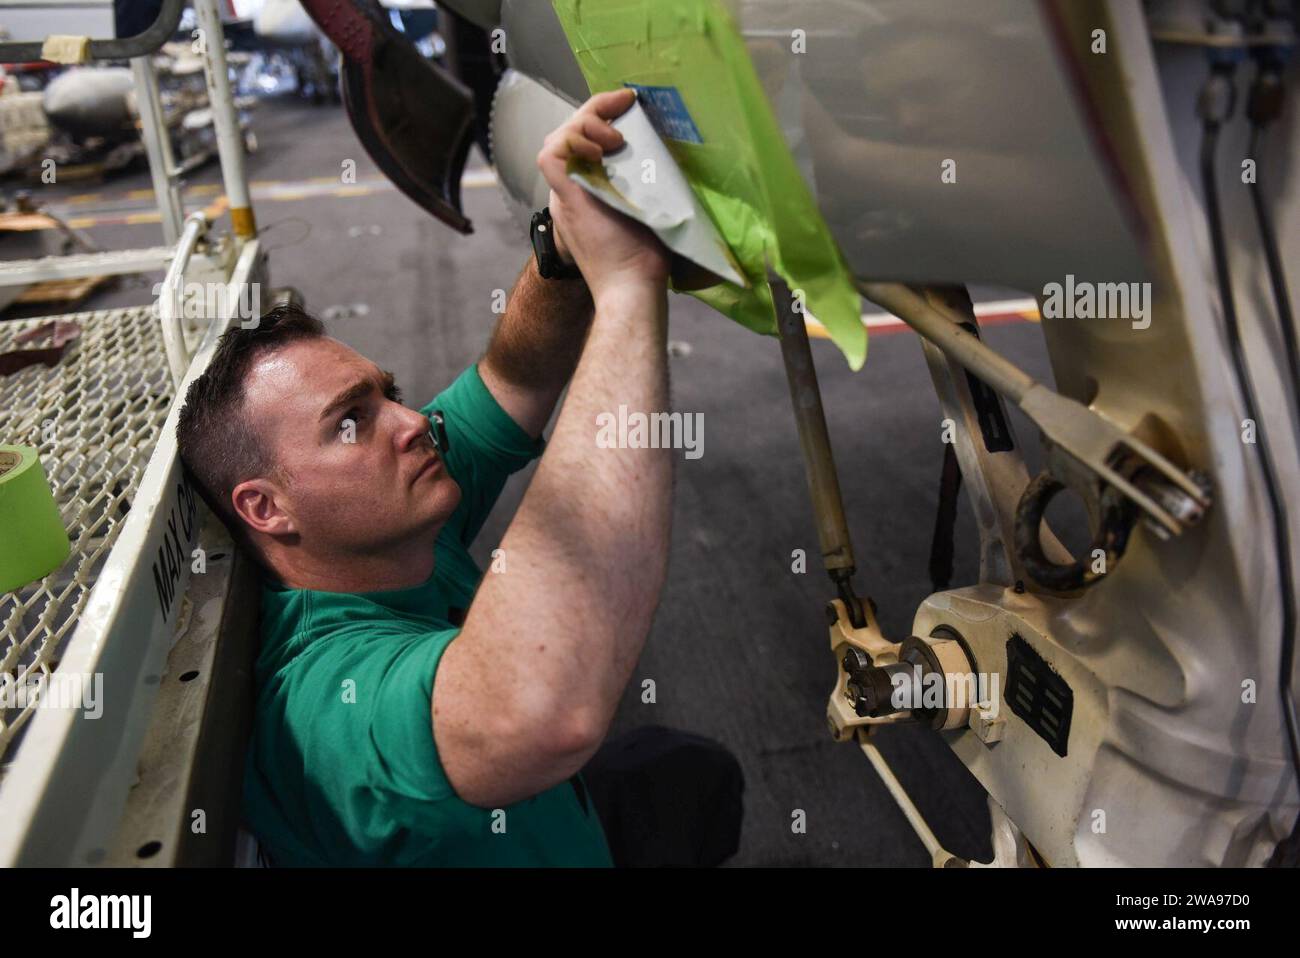 US military forces. 180518DZ642-0021 MEDITERRANEAN SEA (May 18, 2018) Aviation Structural Mechanic 1st Class Clinton Ramisiare, assigned to the 'Seahawks' of Carrier Airborne Early Warning Squadron (VAW) 126, prepares to paint an E-2D Hawkeye in the hangar bay aboard the Nimitz-class aircraft carrier USS Harry S. Truman (CVN 75). As the Carrier Strike Group 8 flag ship, Truman's support of Operation Inherent Resolve demonstrates the capability and flexibility of U.S. Naval Forces, and its resolve to eliminate the terrorist group ISIS and the threat it poses. (U.S. Navy photo by Mass Communicat Stock Photo